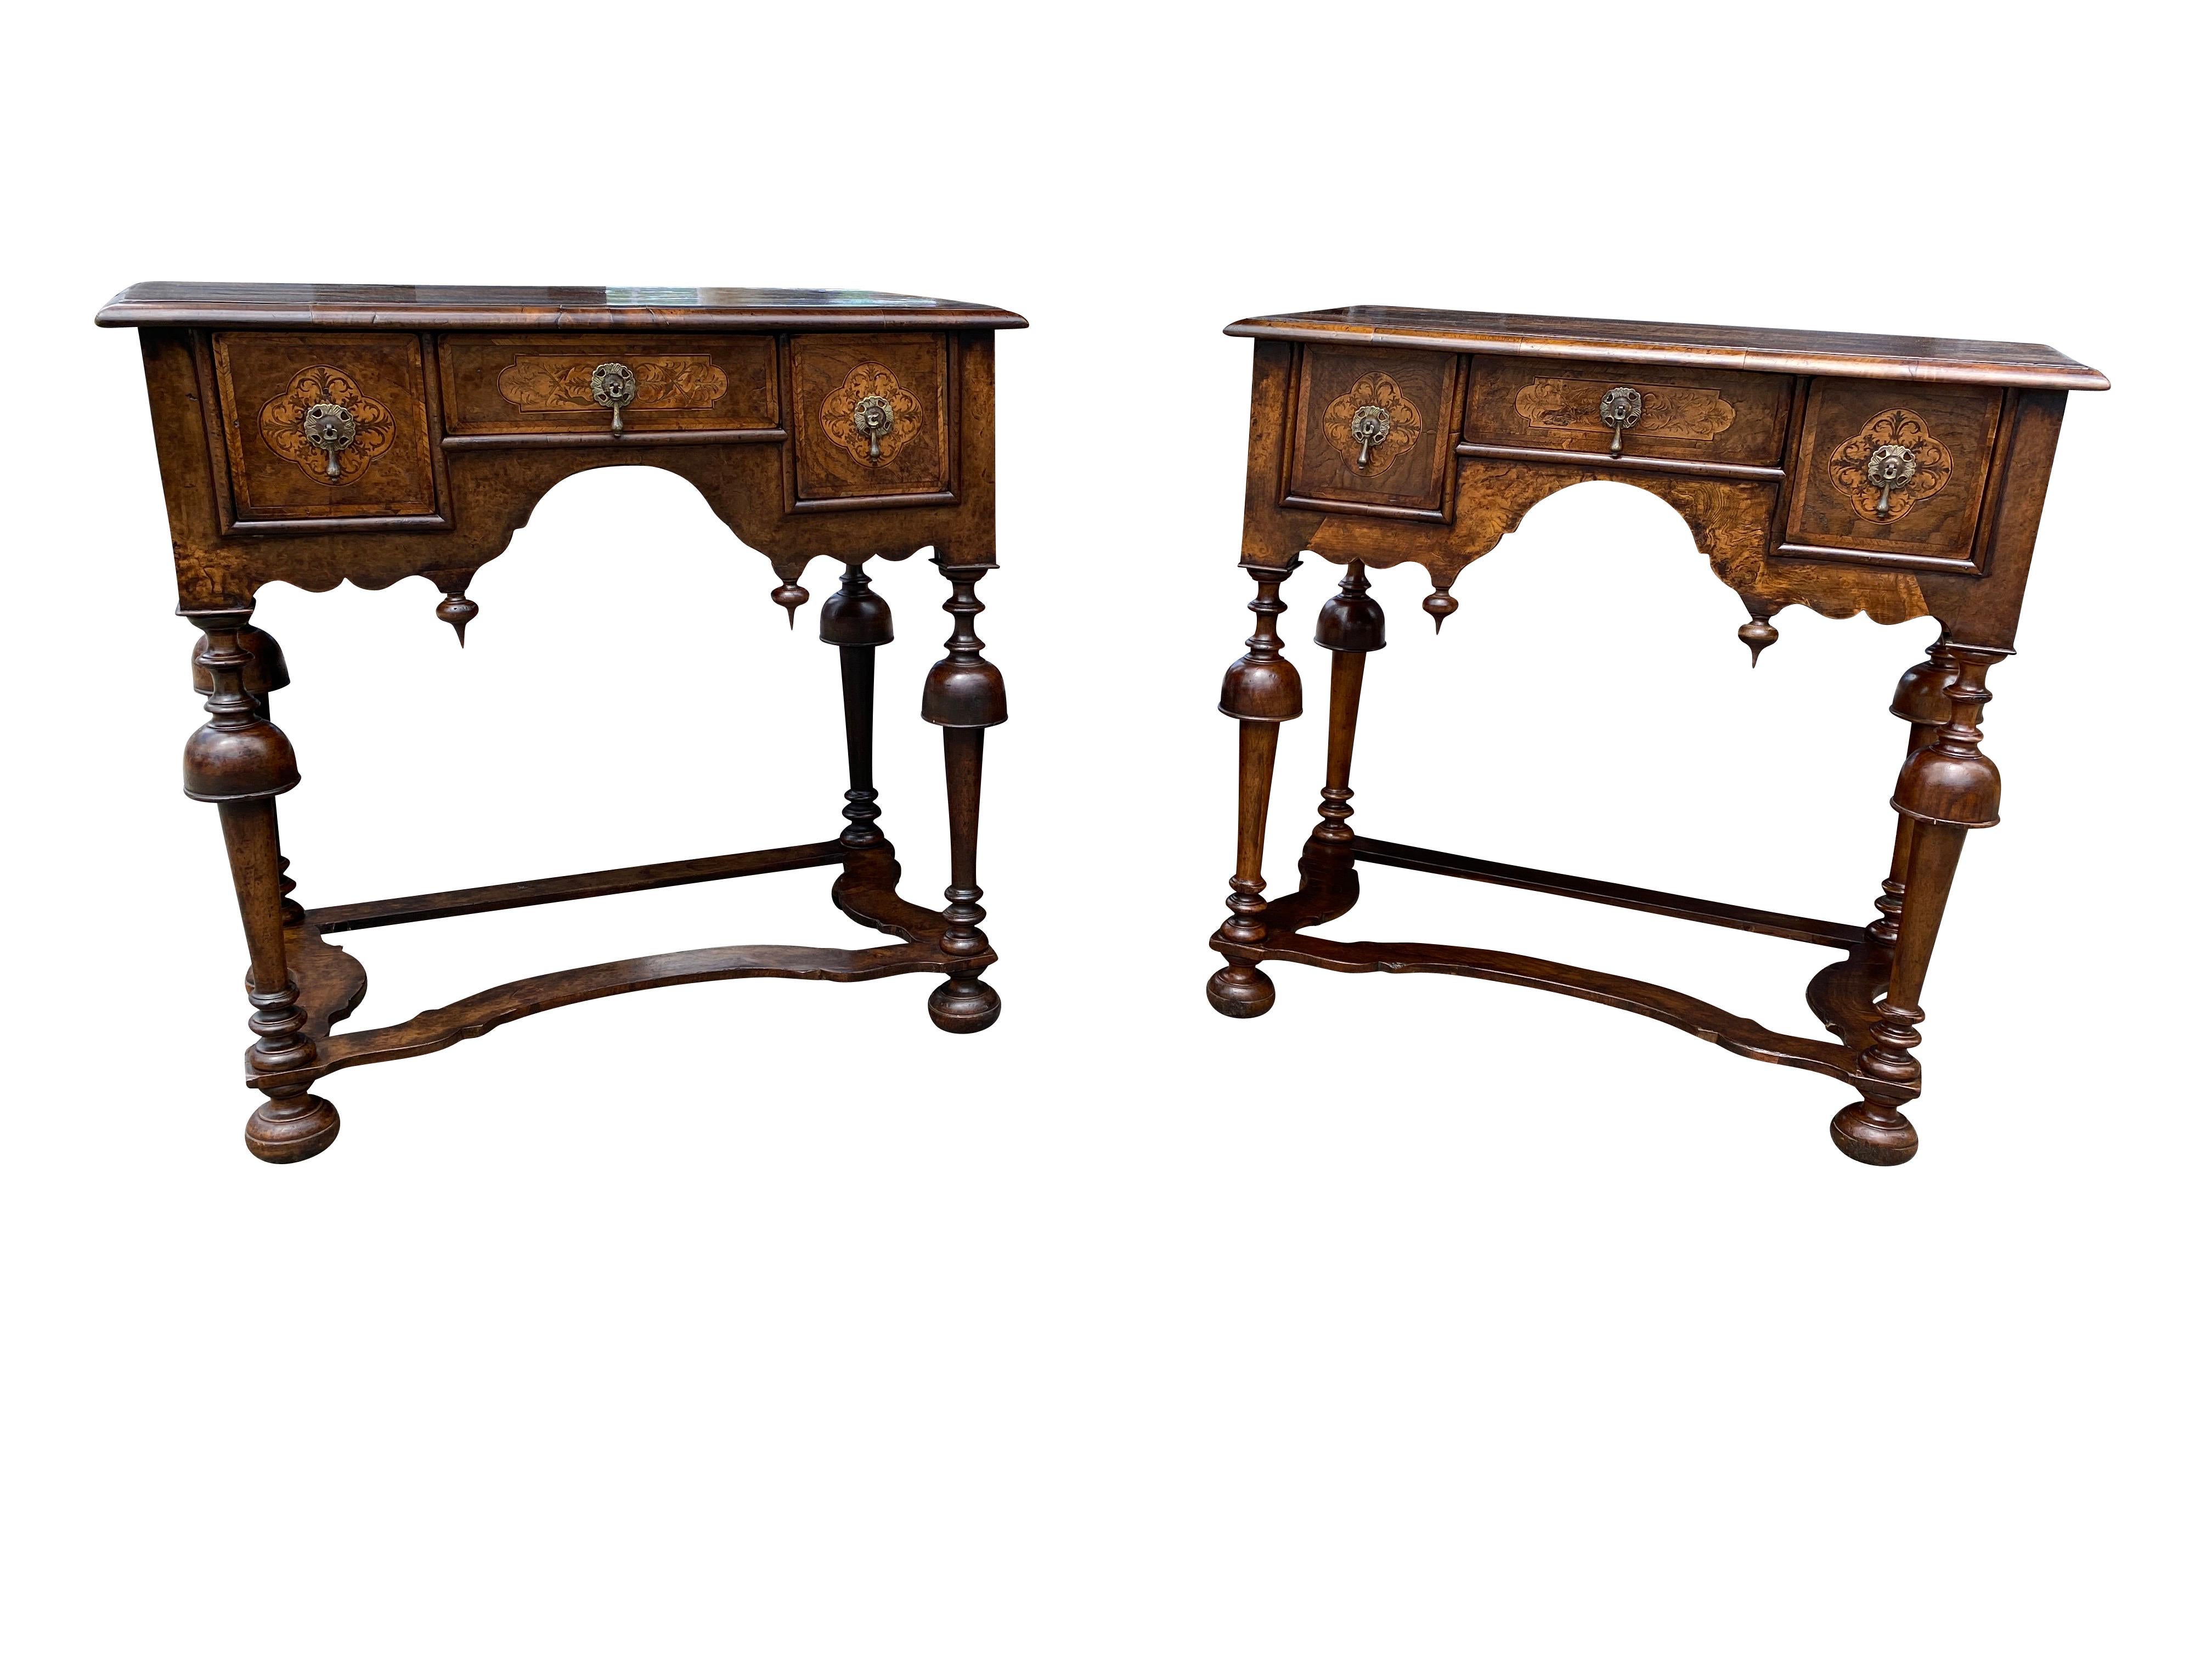 Each with rectangular tops with central lozenge seaweed marquetry panels and cross banded edge over a central drawer franked by a pair of drawers, raised on trumpet form legs joined by flat stretchers and bun feet.